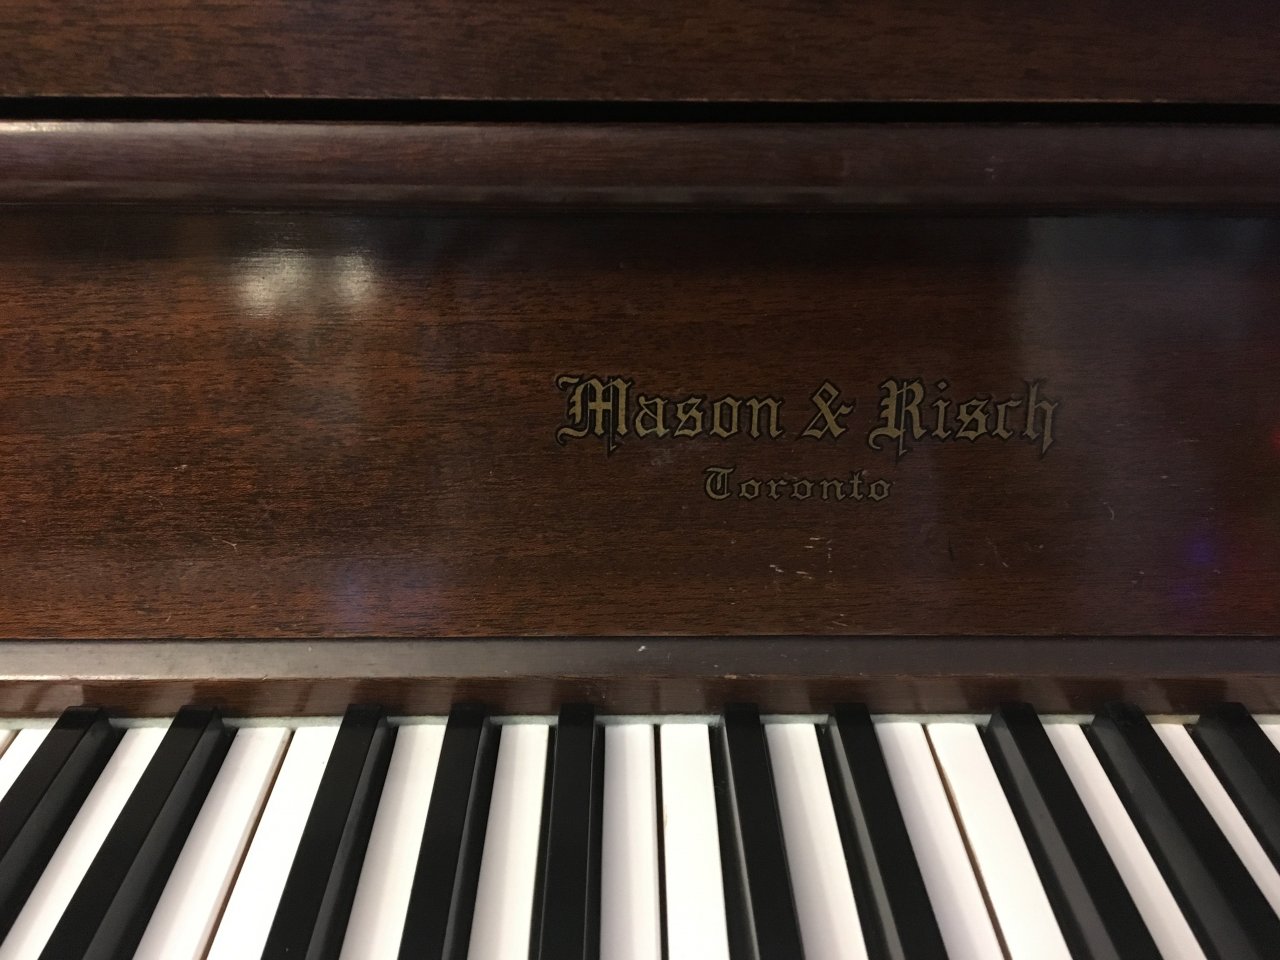 gulbransen piano serial number search